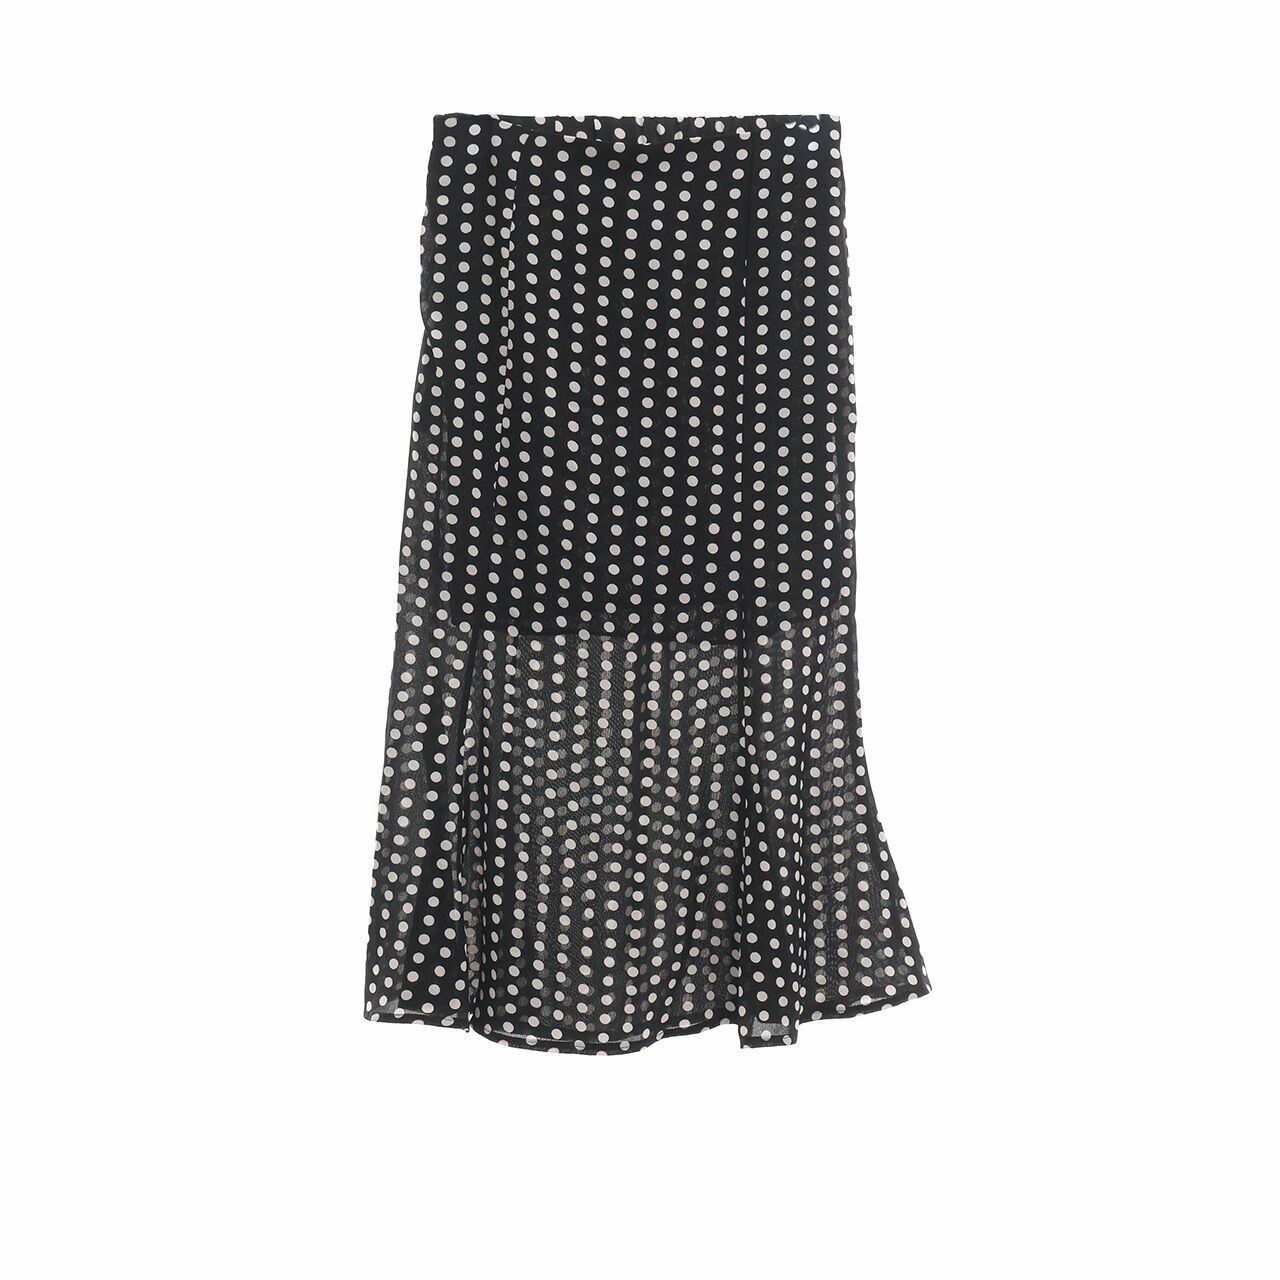 Day by Love And flair Black & White Polkadots Midi Skirt